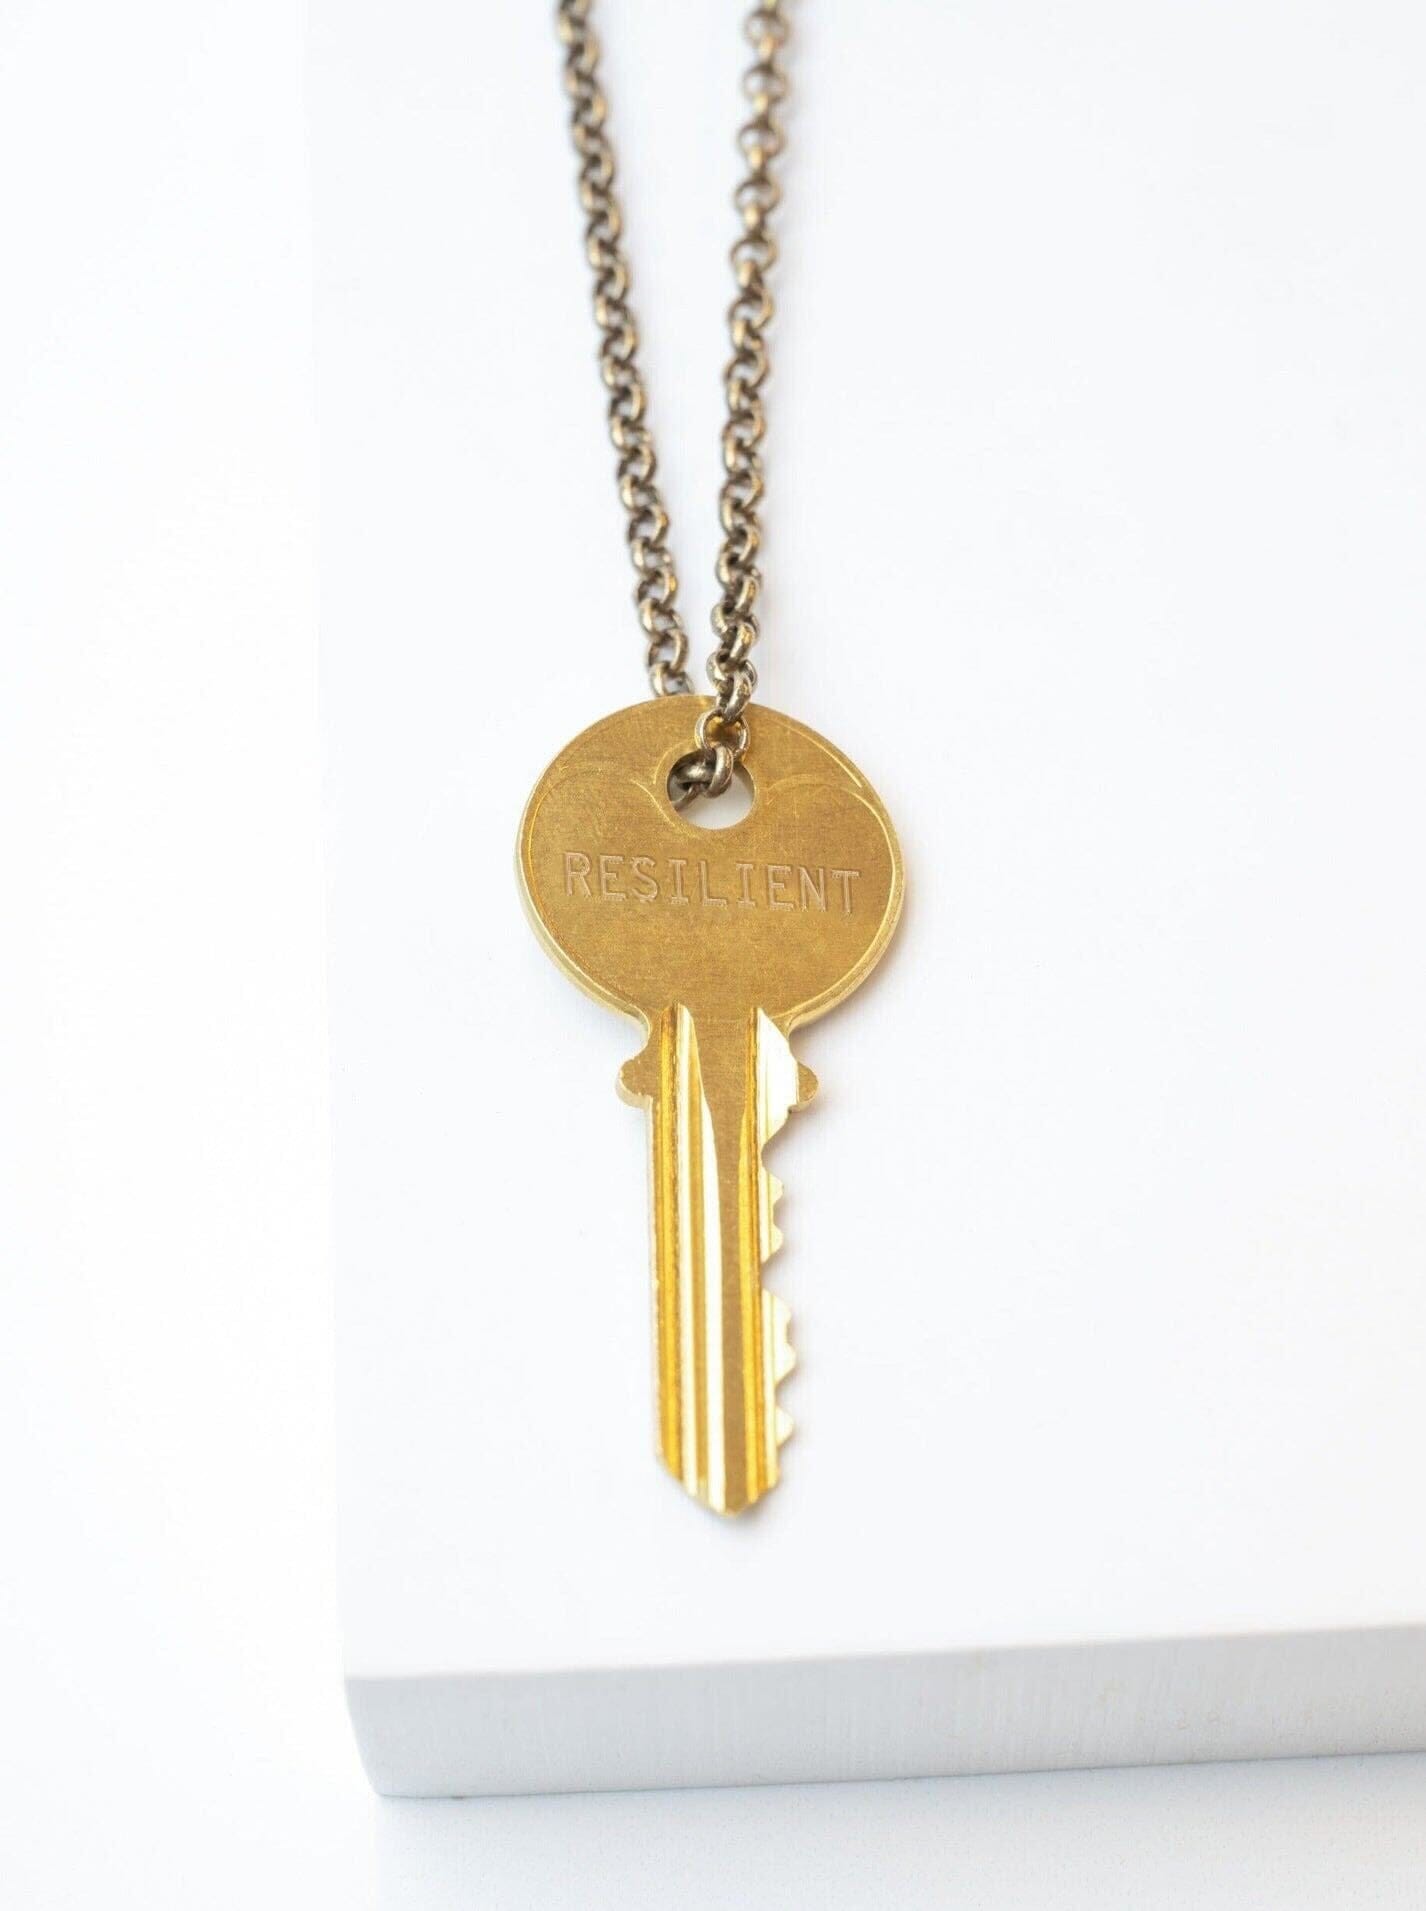 The Giving Keys Vintage Classic Ball Chain Key Necklace in GOLD